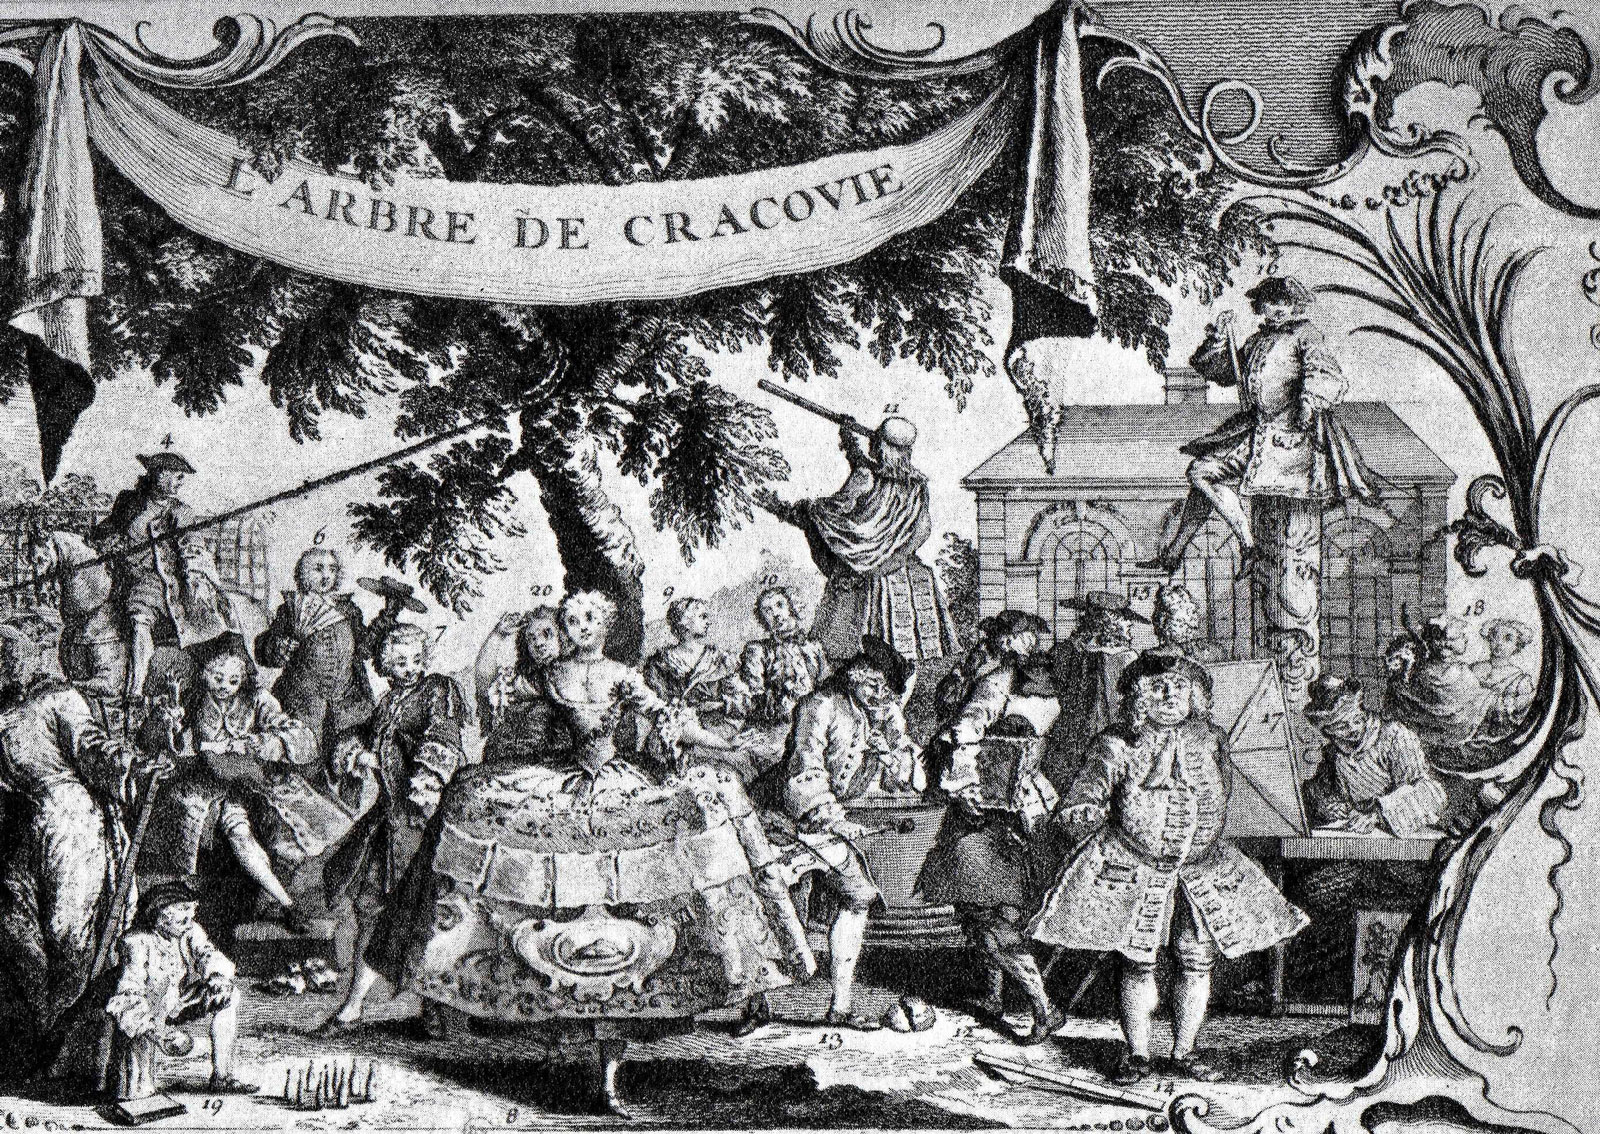 A print depicting the Tree of Cracow, in the gardens of the Palais Royal, circa 1742